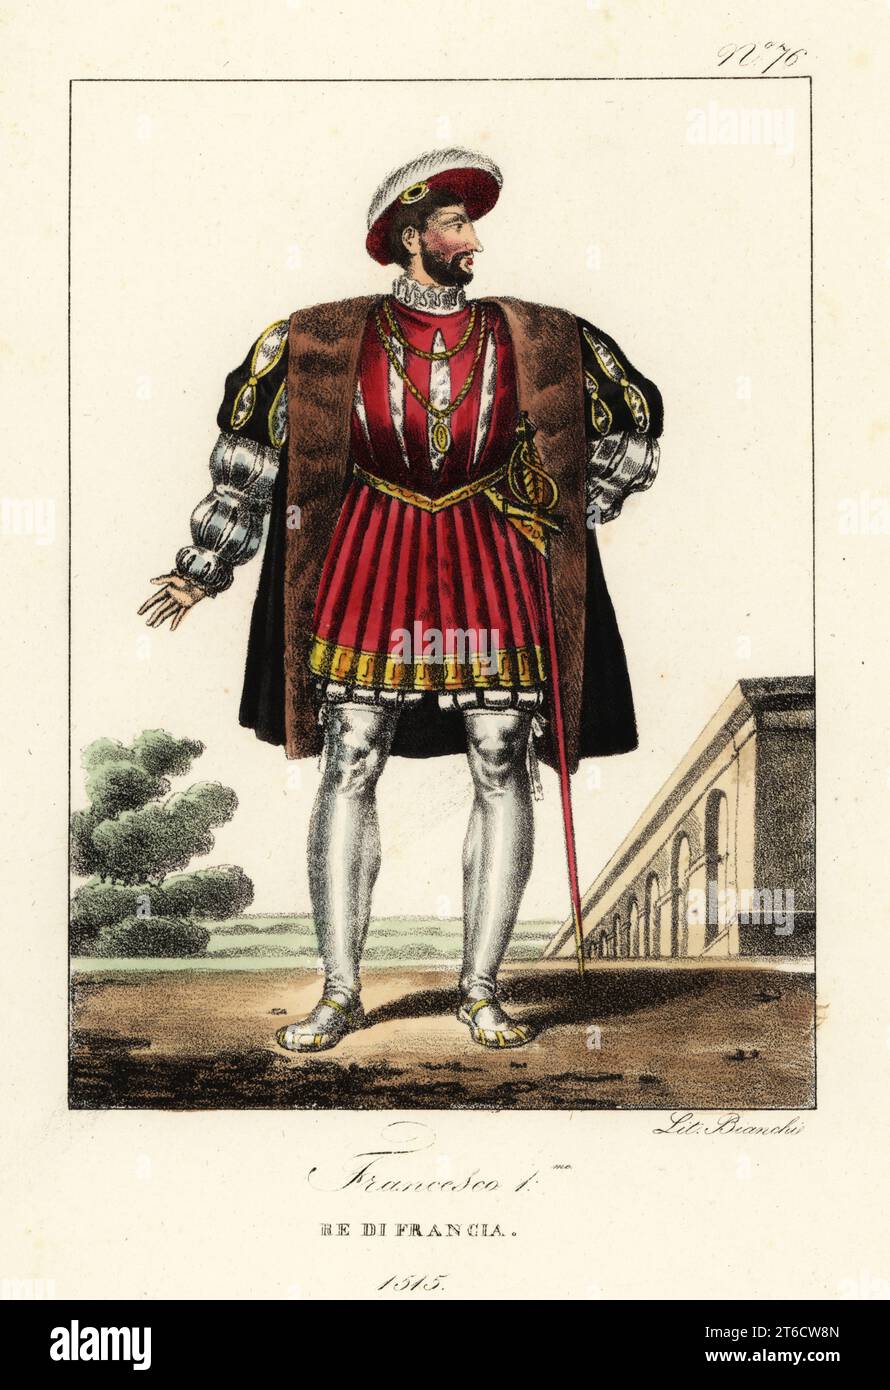 Francis I, King of France, 1515. In bejeweled cap, fur-lined slashed mantle, slashed doublet, hose, with court sword. Francois I, Roi de France. Handcoloured lithograph by Lorenzo Bianchi after Hippolyte Lecomte from Costumi civili e militari della monarchia francese dal 1200 al 1820, Naples, 1825. Italian edition of Lecomtes Civilian and military costumes of the French monarchy from 1200 to 1820. Stock Photo